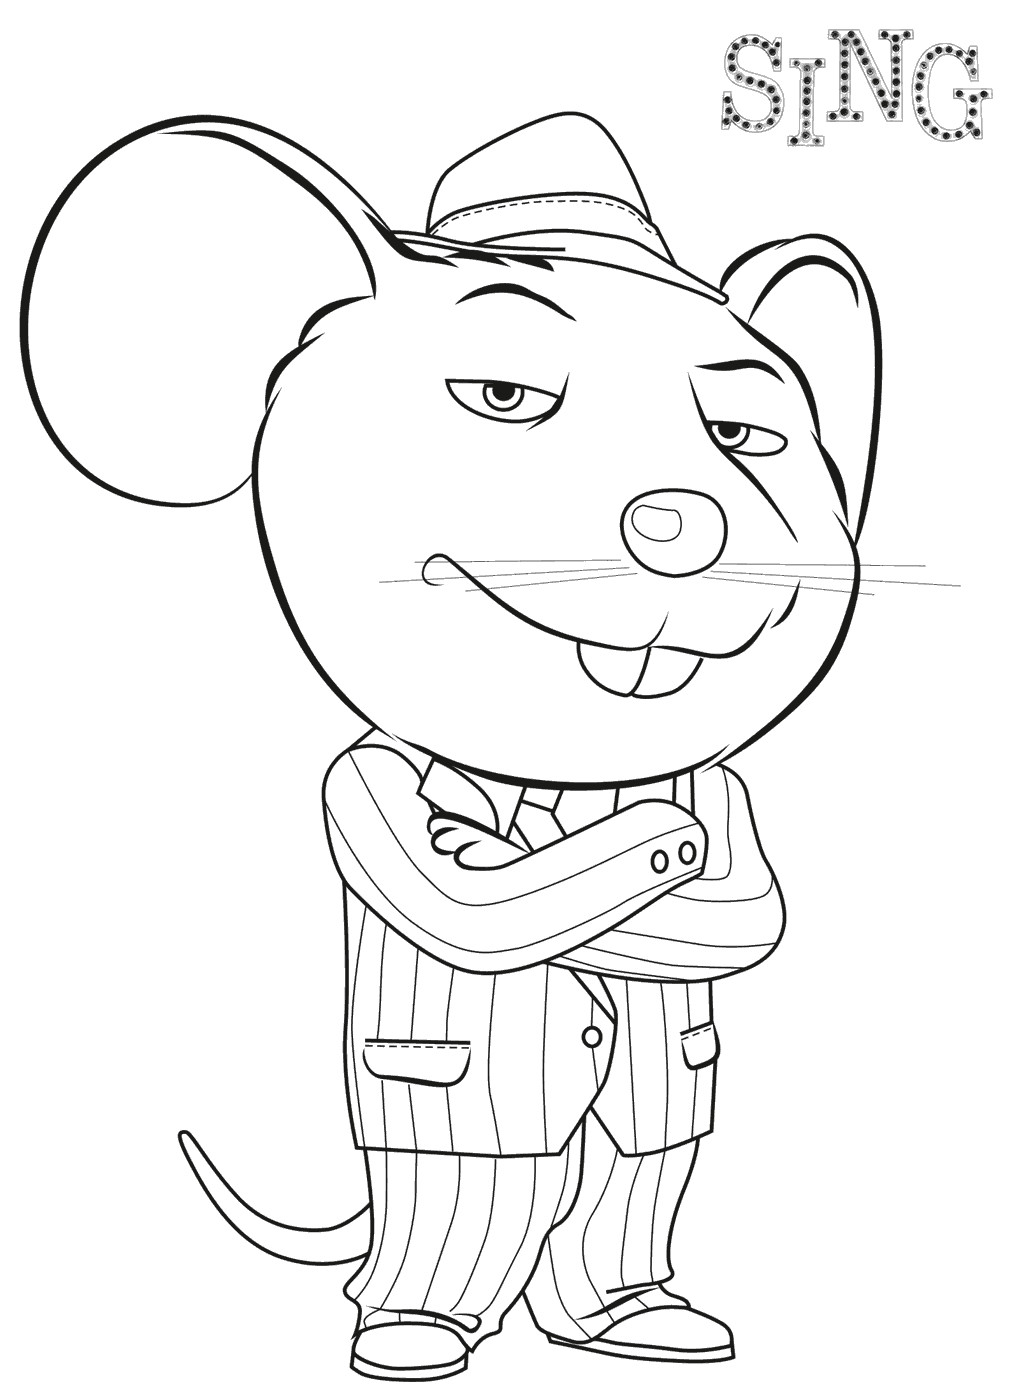 Coloring Book For Kids Online
 Sing Coloring Pages Best Coloring Pages For Kids